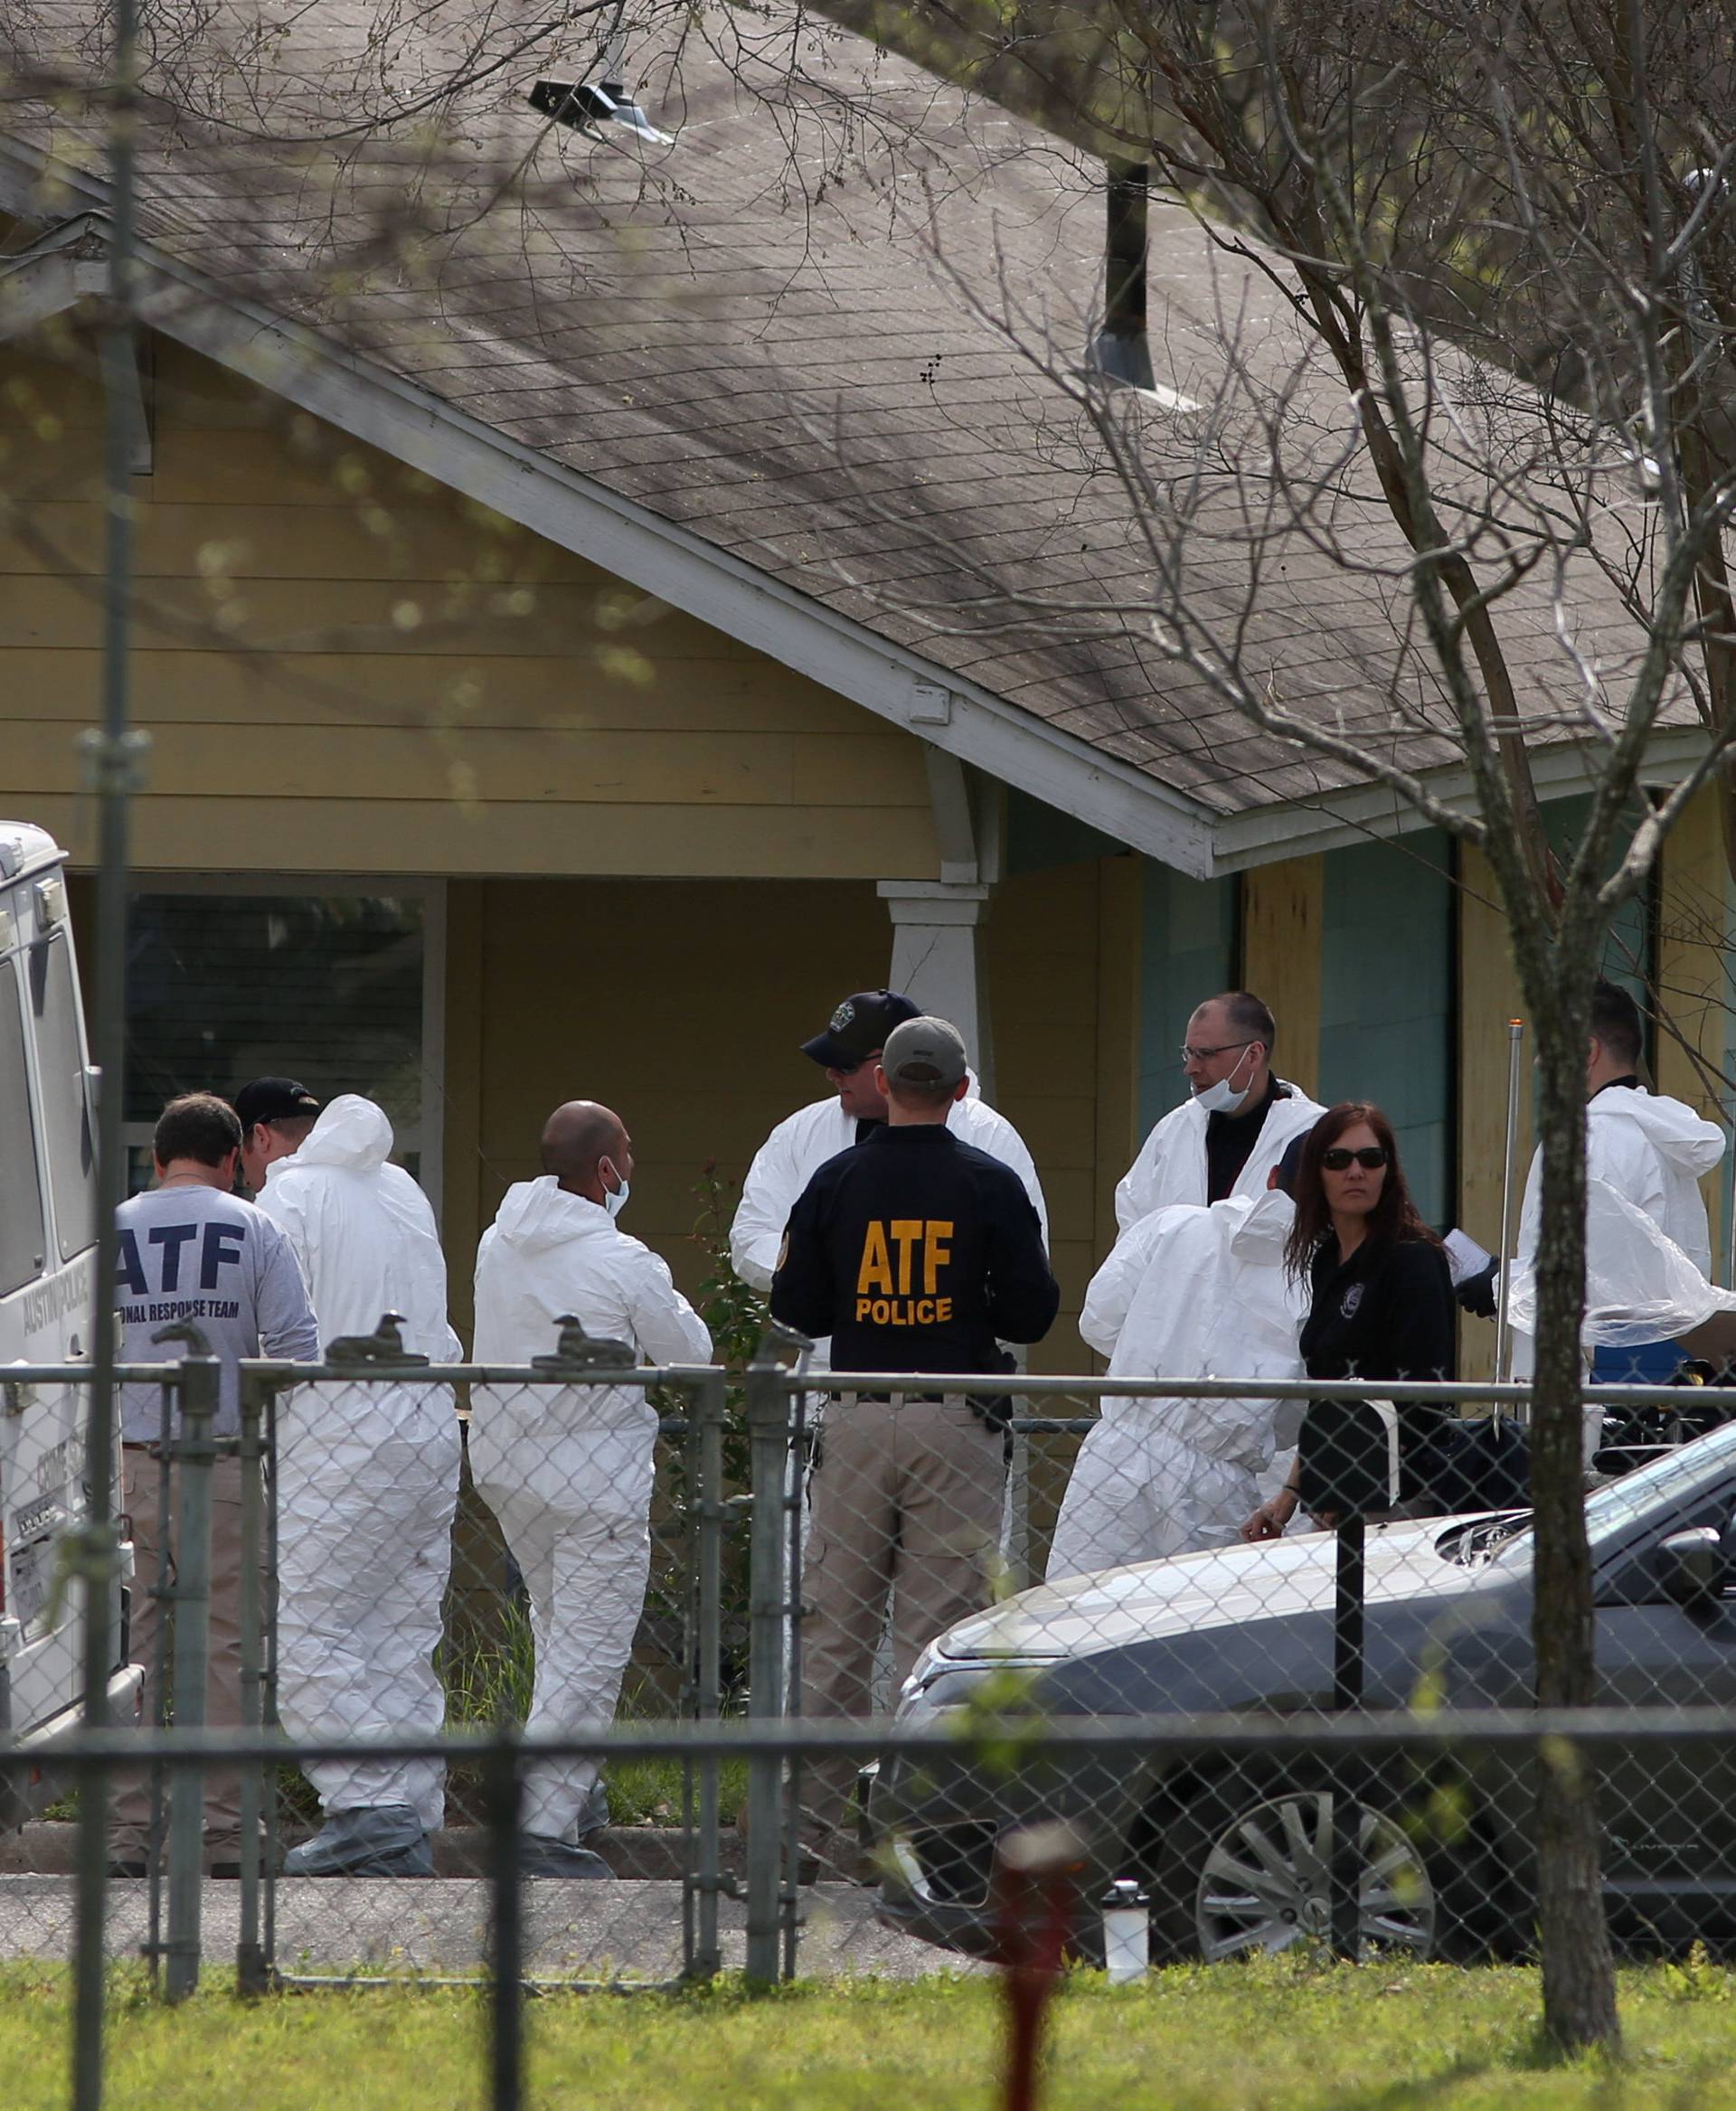 Law enforcement personnel investigate the home where Austin serial bomber Mark Anthony Conditt lived in Pflugerville